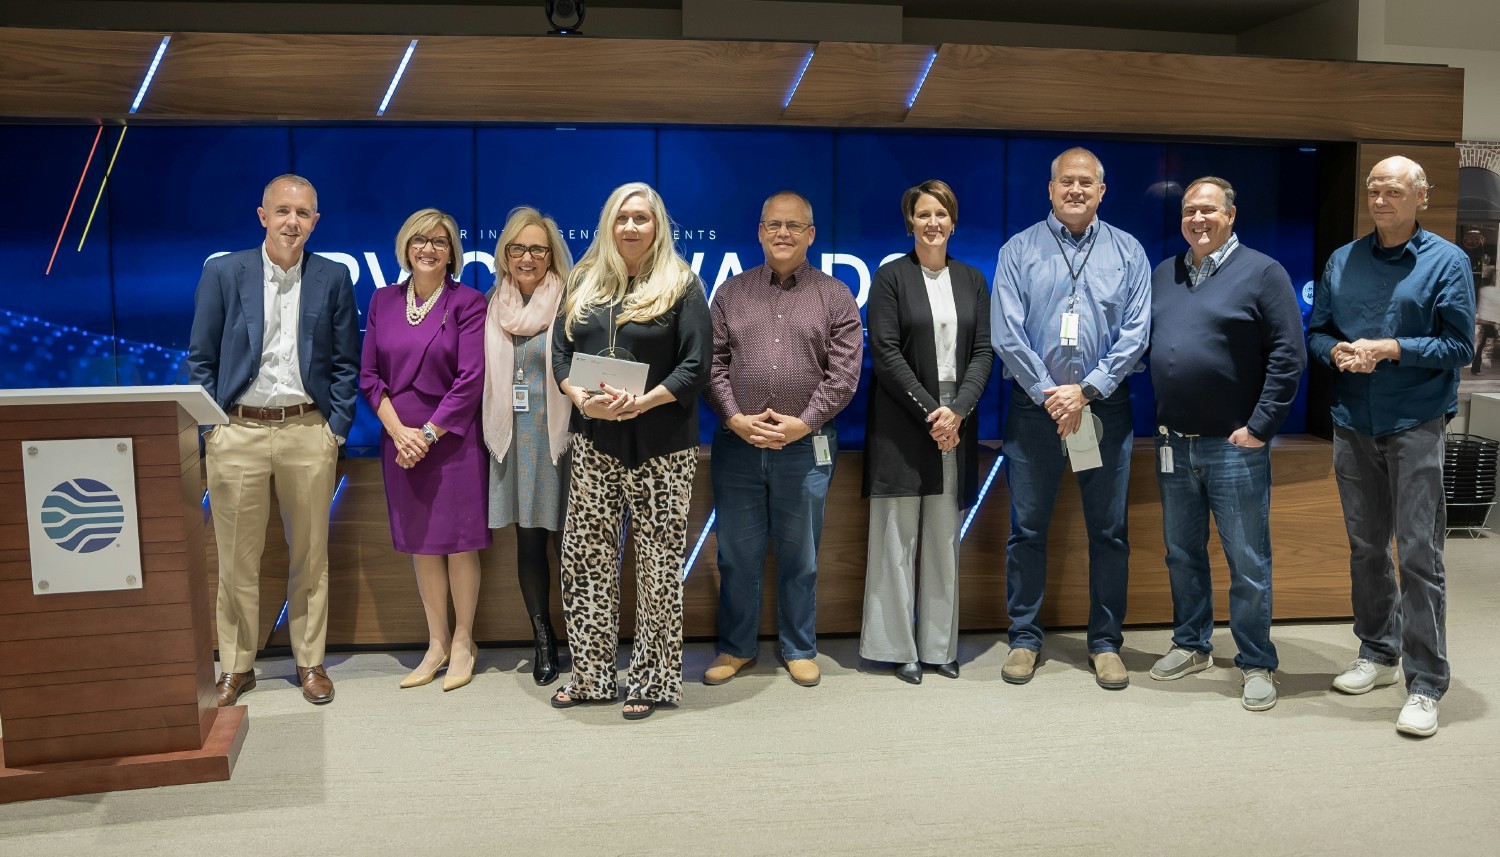 Members of our Leadership Team recognize associates with 25 years of tenure at our annual Service Awards.